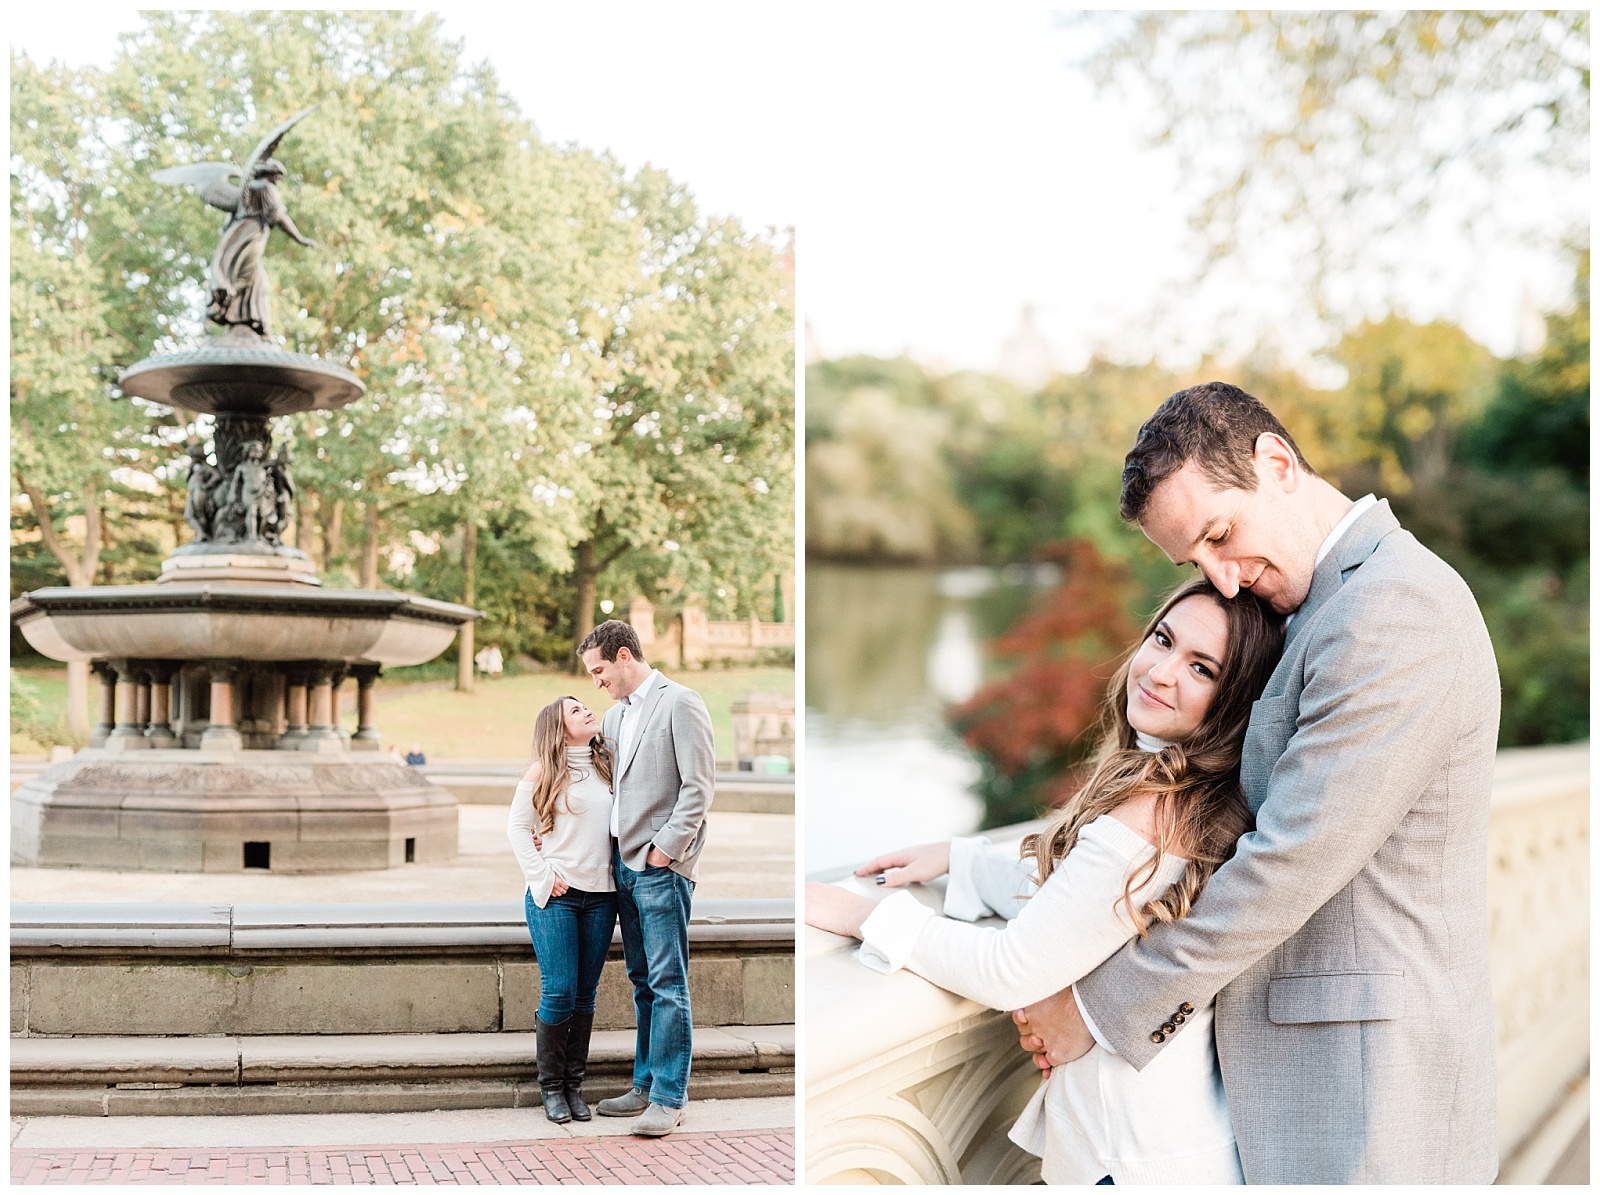 Bethesda Fountain,Central Park,City,Engagement Session,Fall,NYC,Nature,New York,Wedding Photographer,